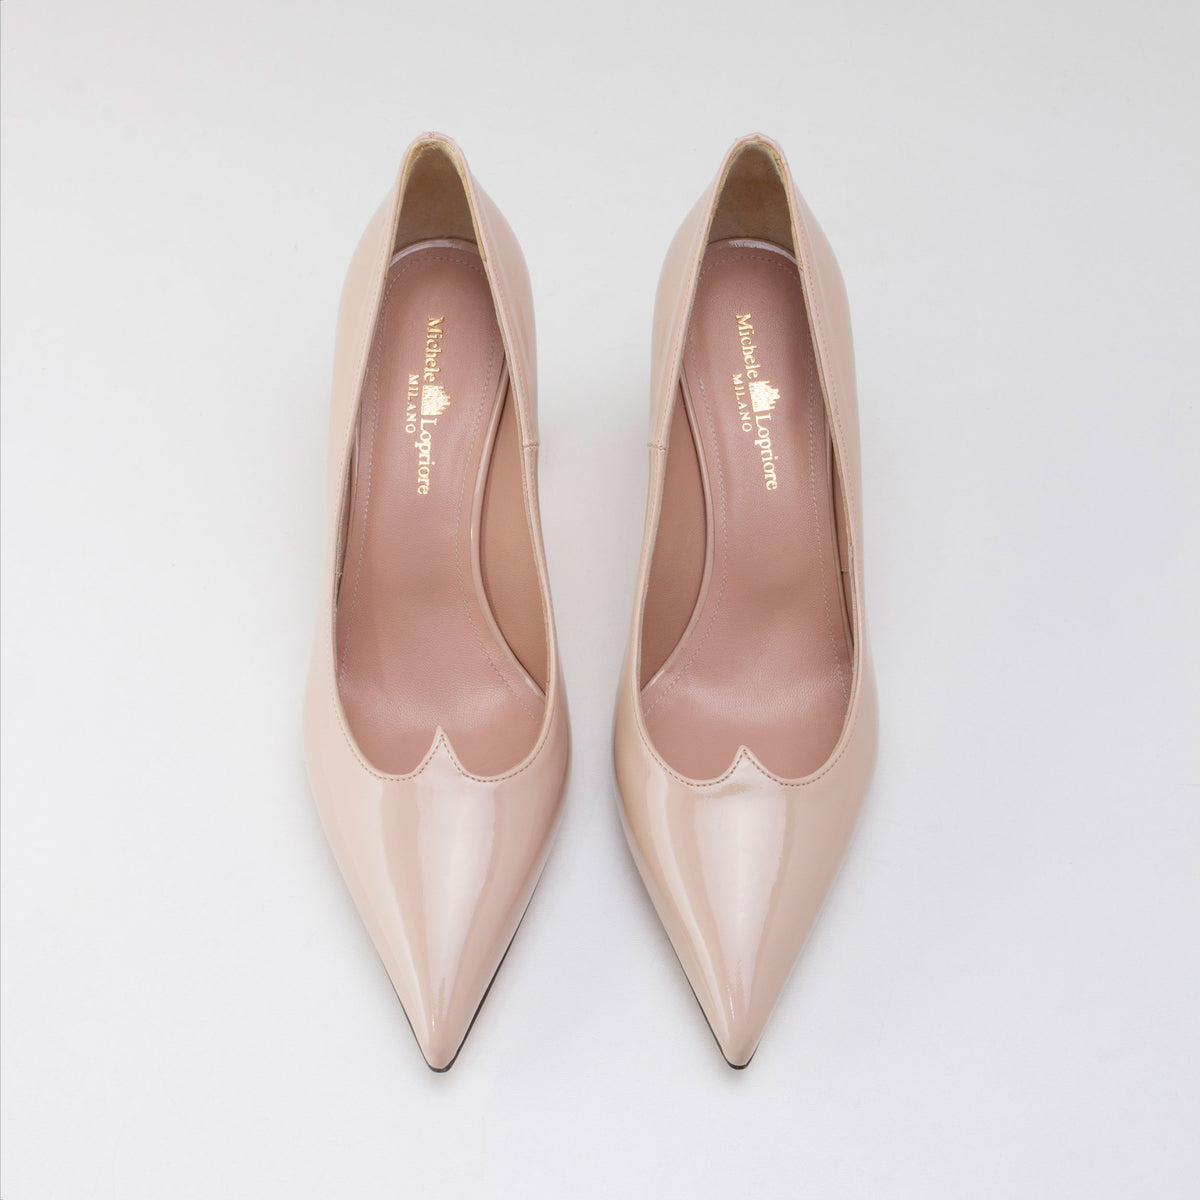 nude patent leather